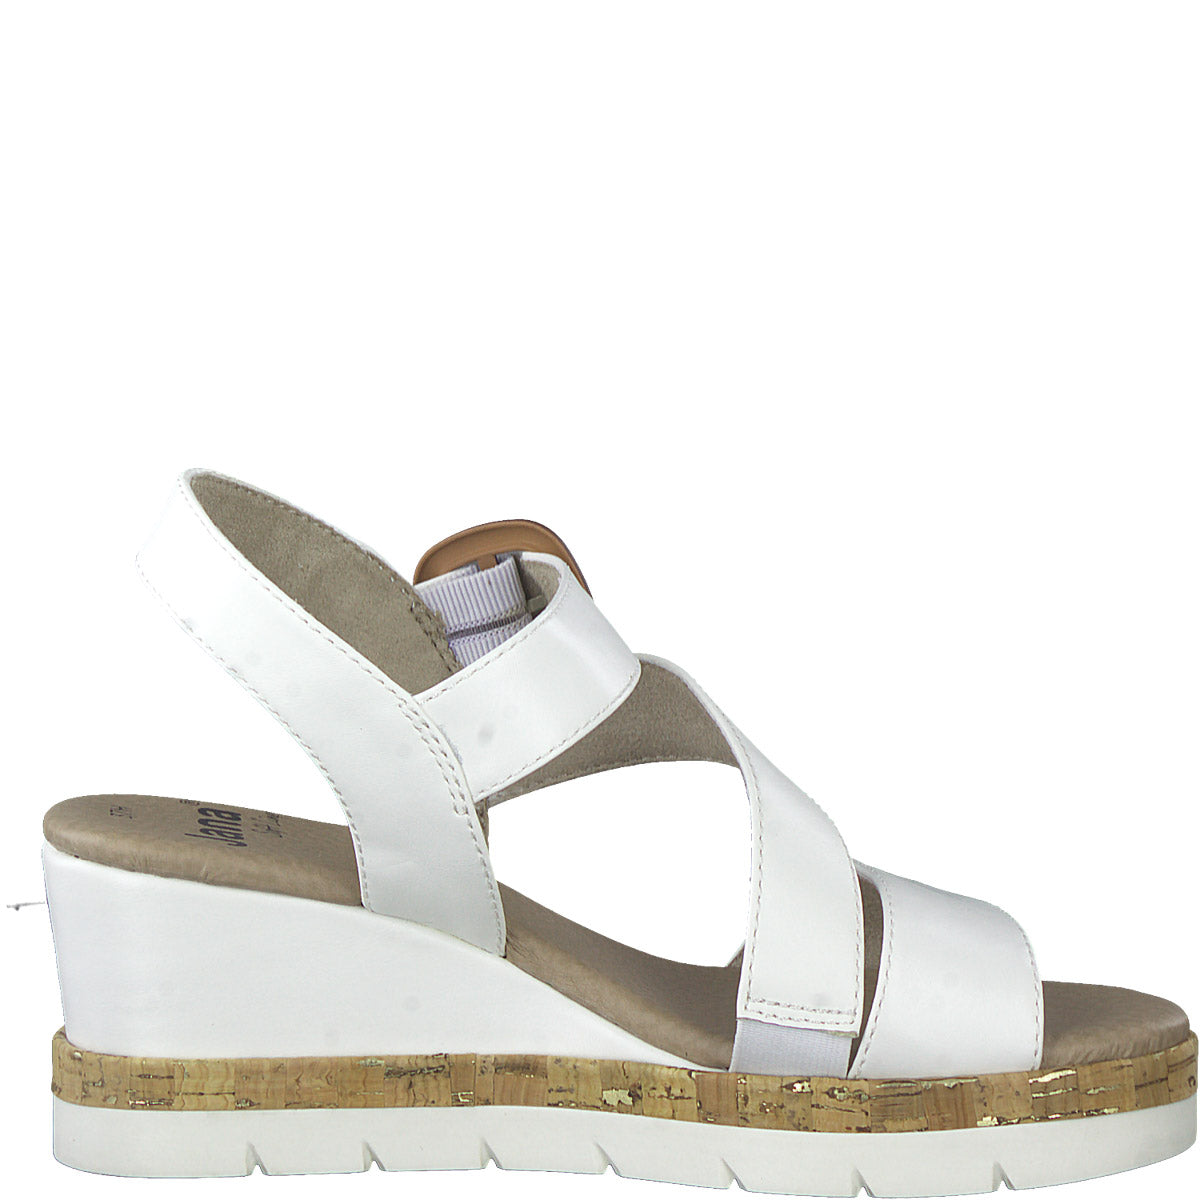 White Wedge Strappy Sandals with Cork Trim for Summer